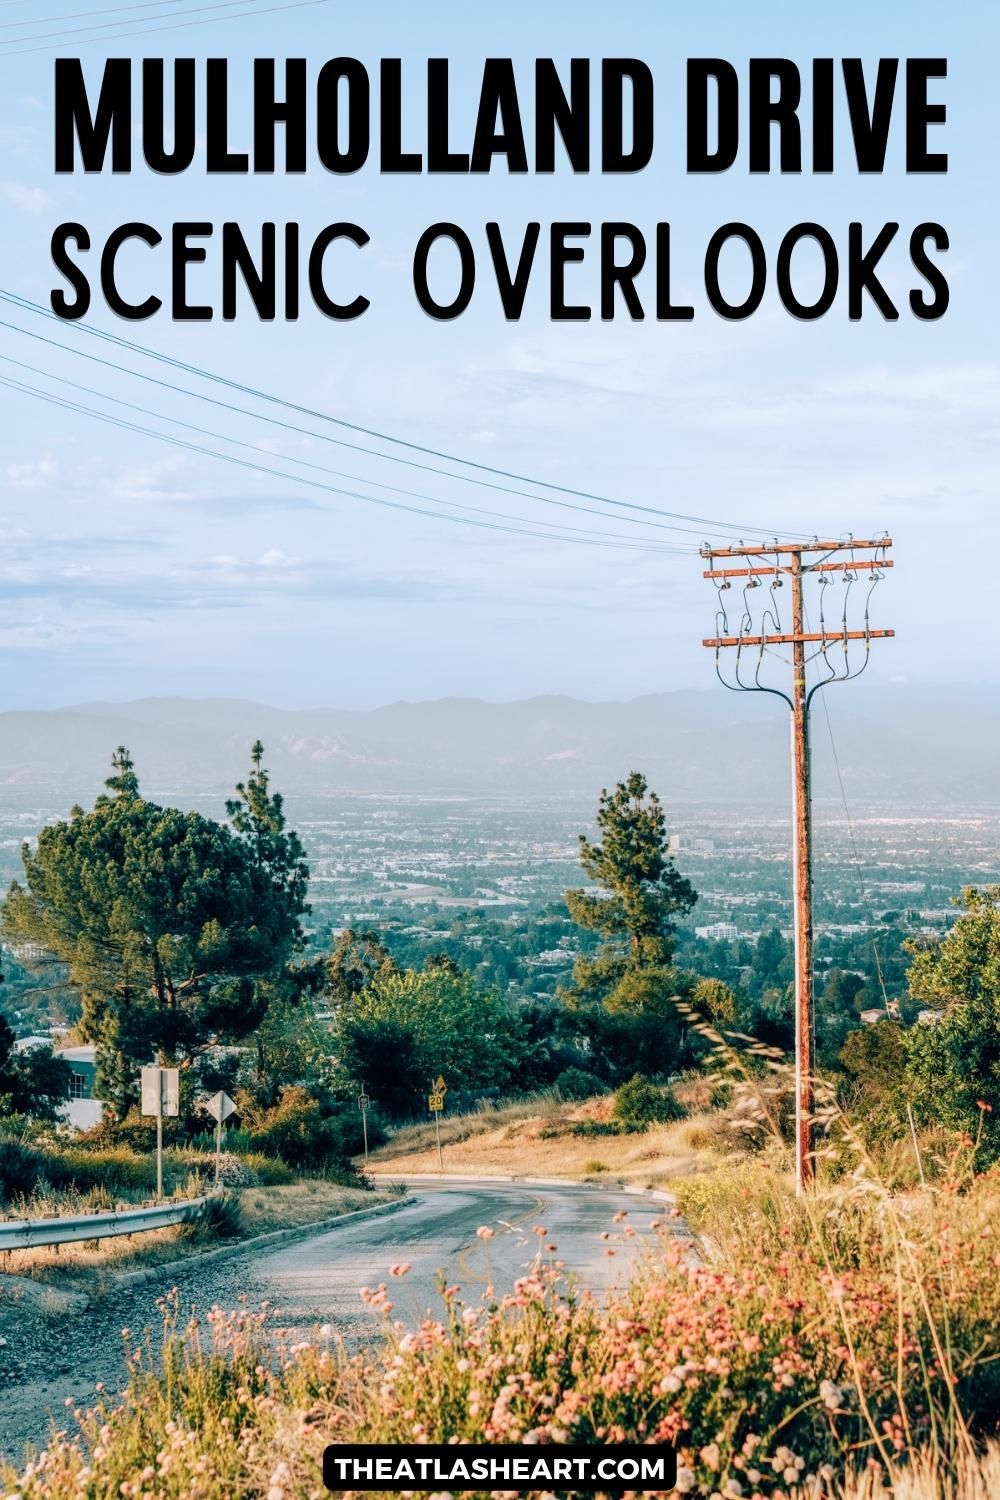 A telephone pole in the foreground of a view looking down a sloped road, lined with dry golden grass and the hazy sprawl on Los Angeles beyond, with the text overlay, "Mulholland Drive Scenic Overlooks."